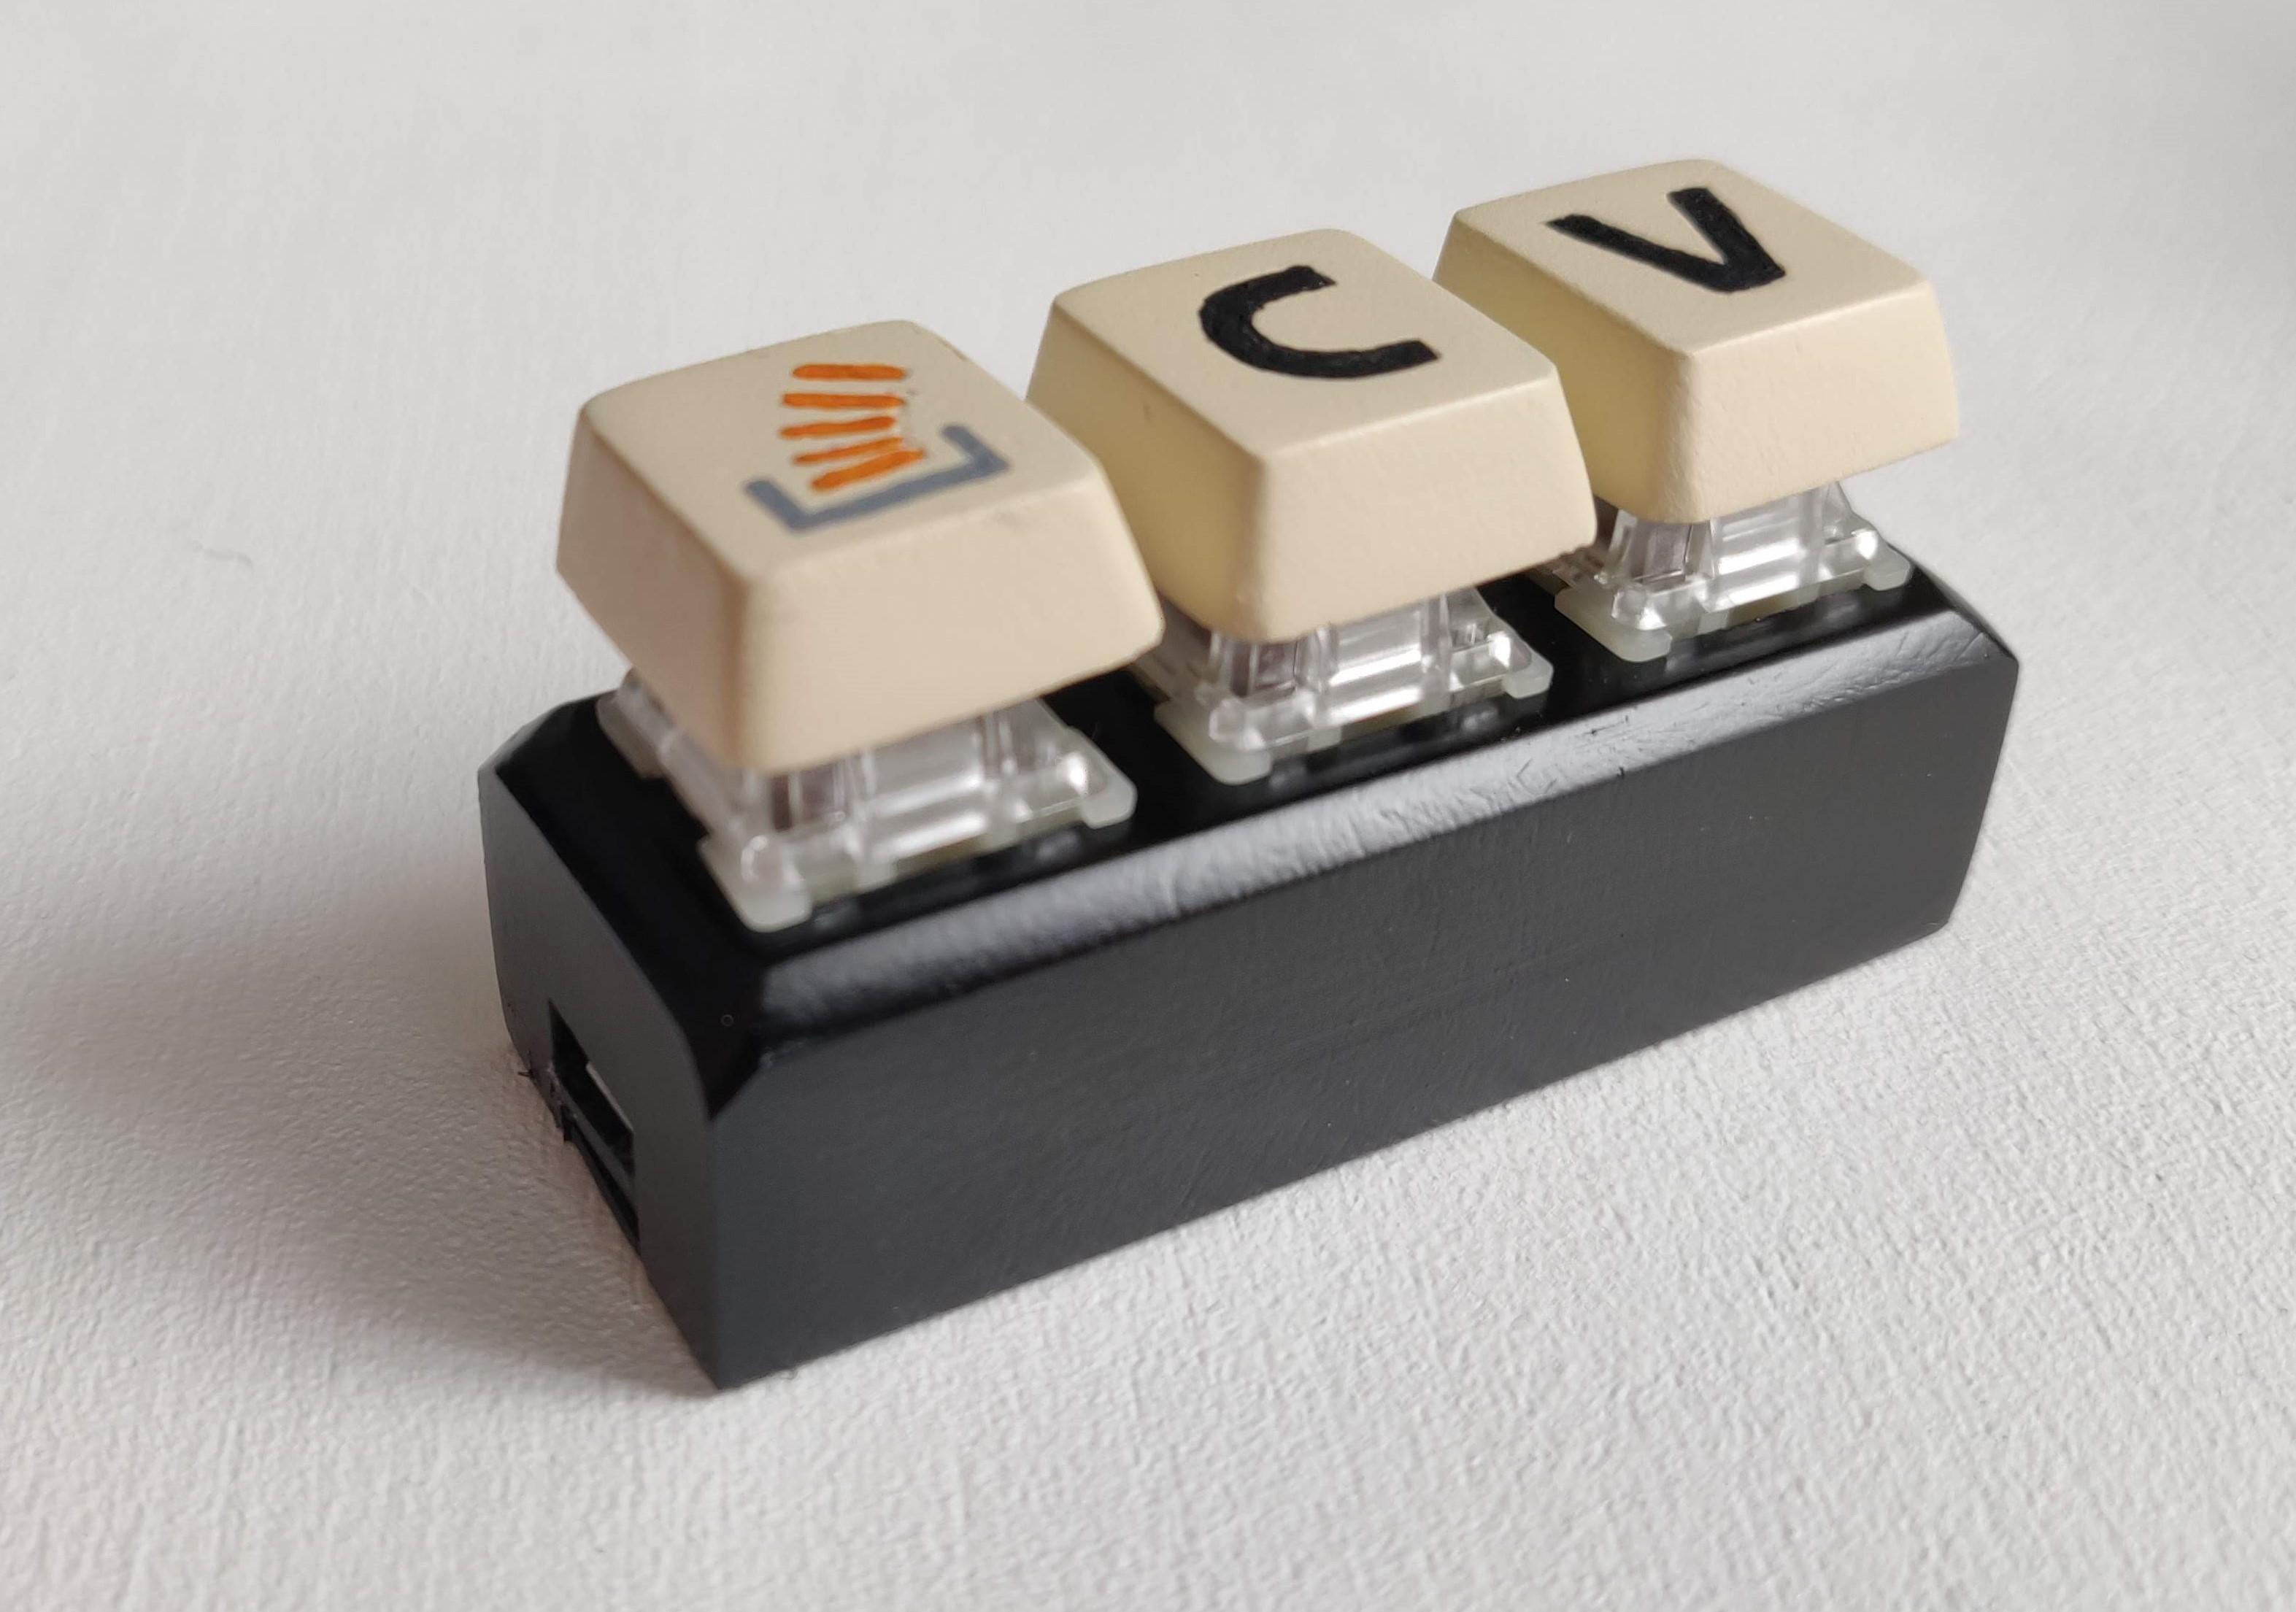 image for my finished mini keyboard